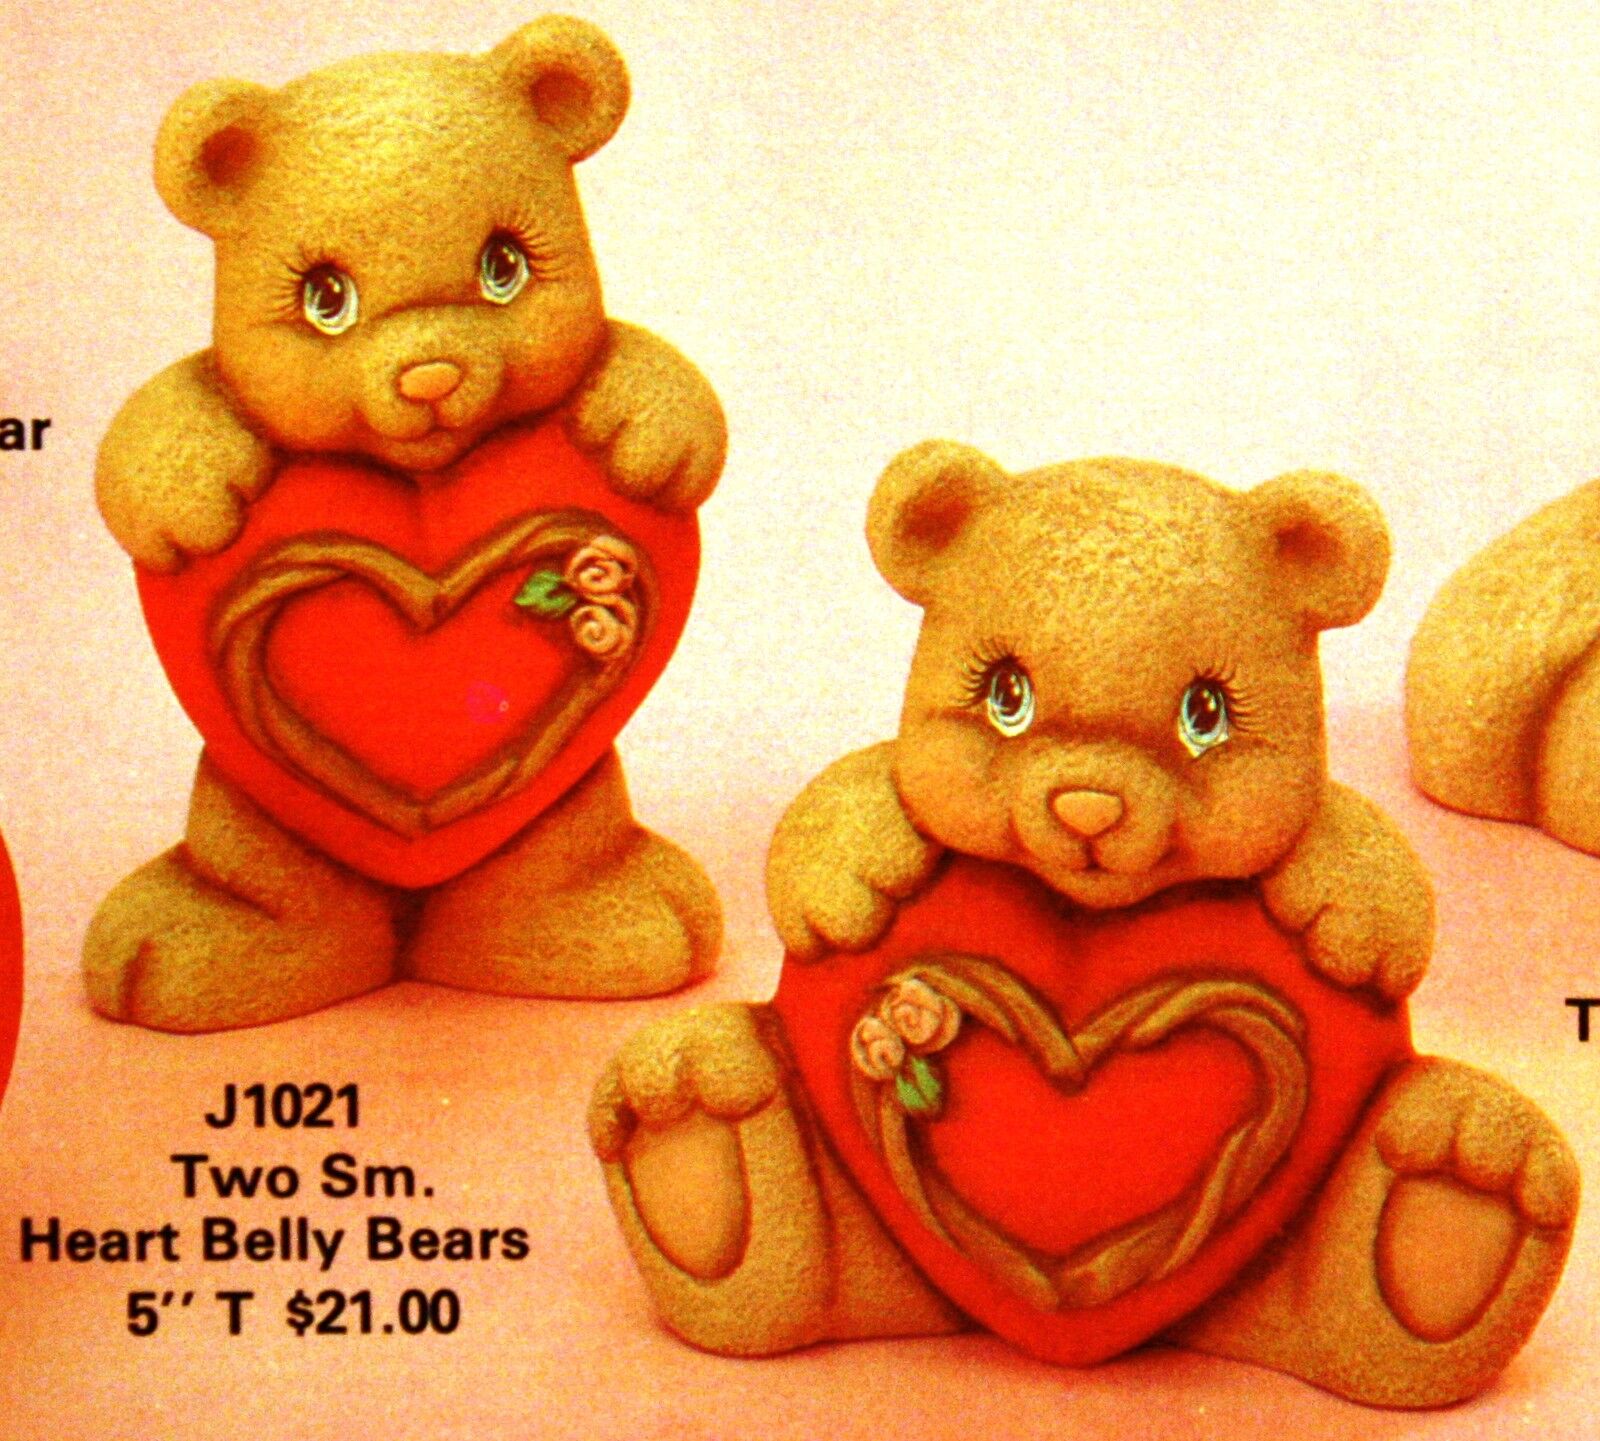 Ceramic Bisque Heart Bear Belly Bears Clay Magic J1021 U-Paint Ready To Paint